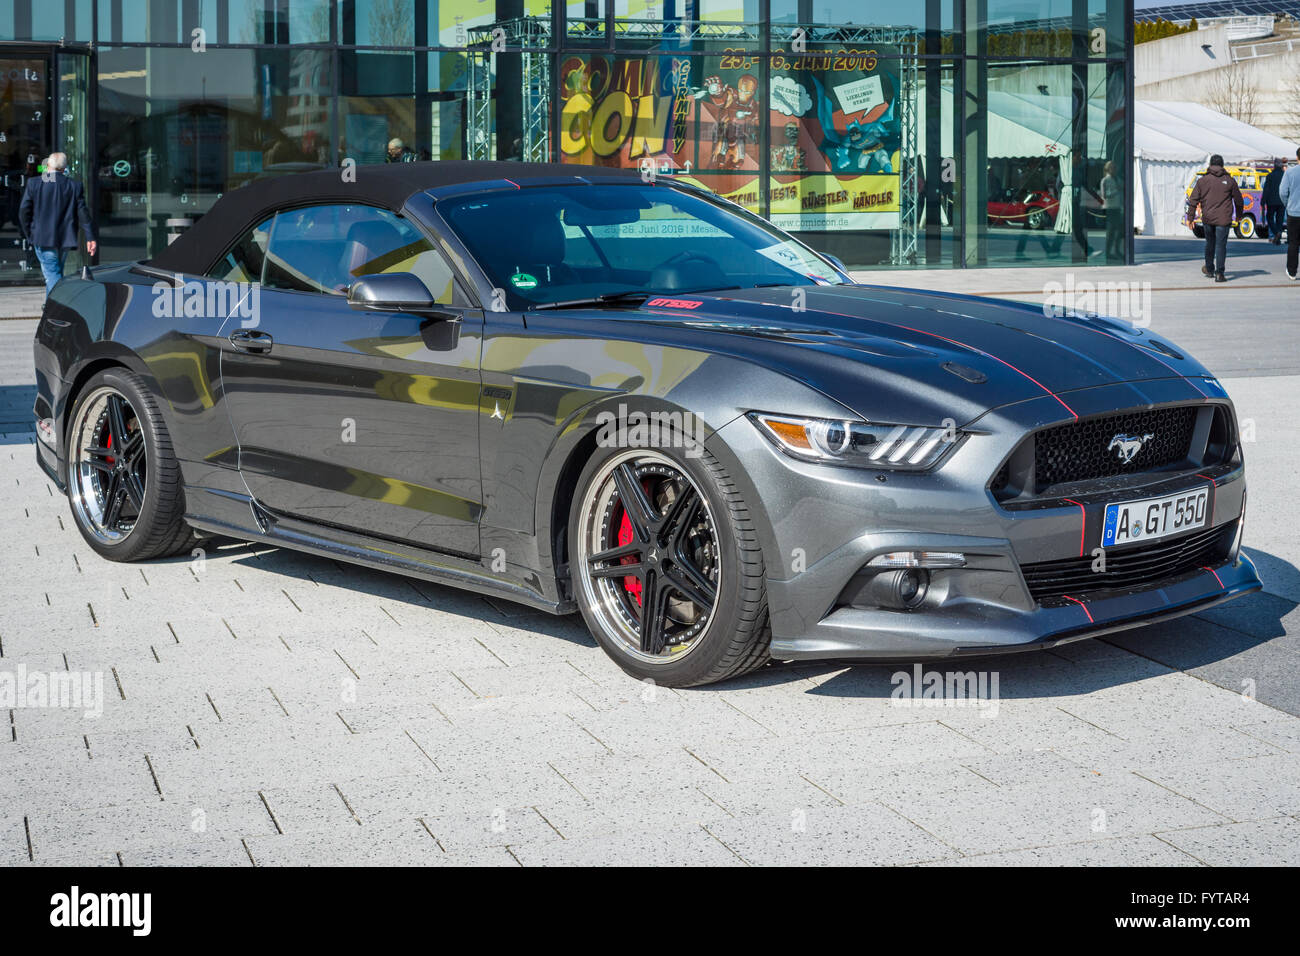 Muscle car Ford Mustang GT 550 Aero Edition, 2016. Stock Photo